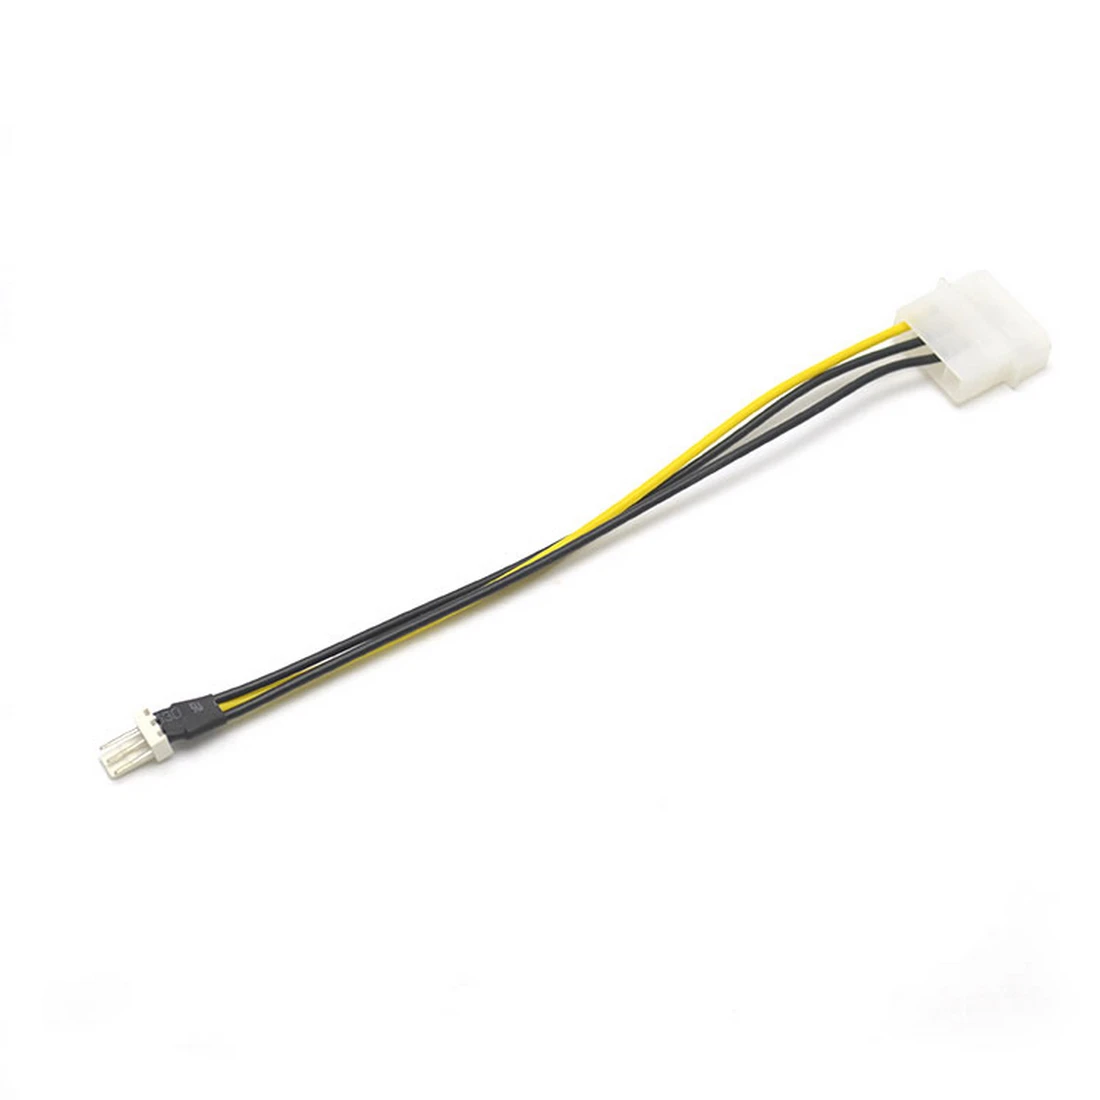 H00bf5e1e50dd4b928afc8f304e90d9c1s 1 PCS 20cm 4 Pin Molex IDE To 3 Pin PC Computer CPU Case Fan Power Connector Cable Adapter